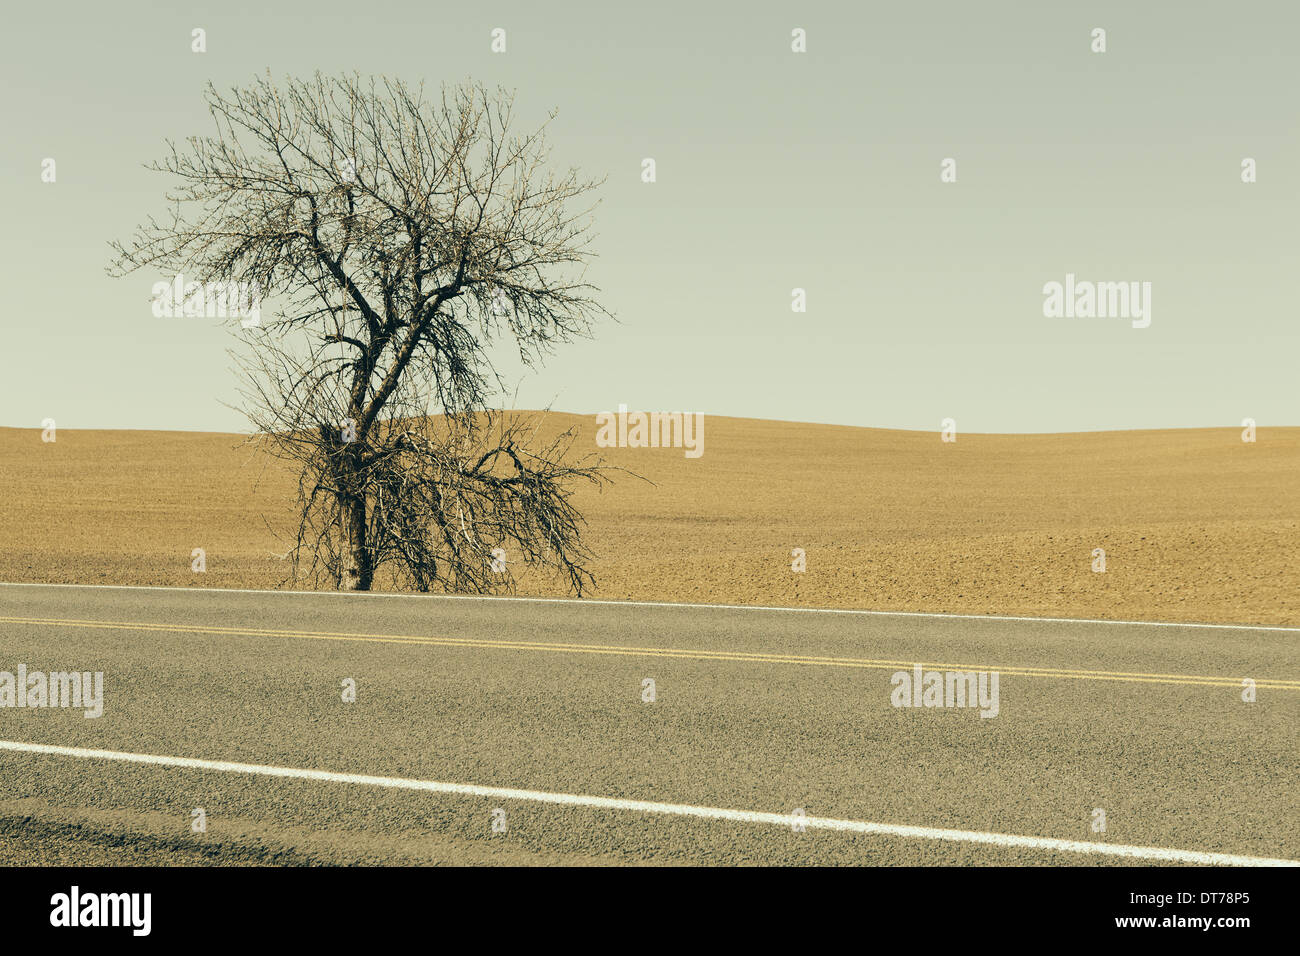 A Cottonwood tree at the roadside in a landscape of ploughed fields and farmland near Pullman in Washington state. Stock Photo